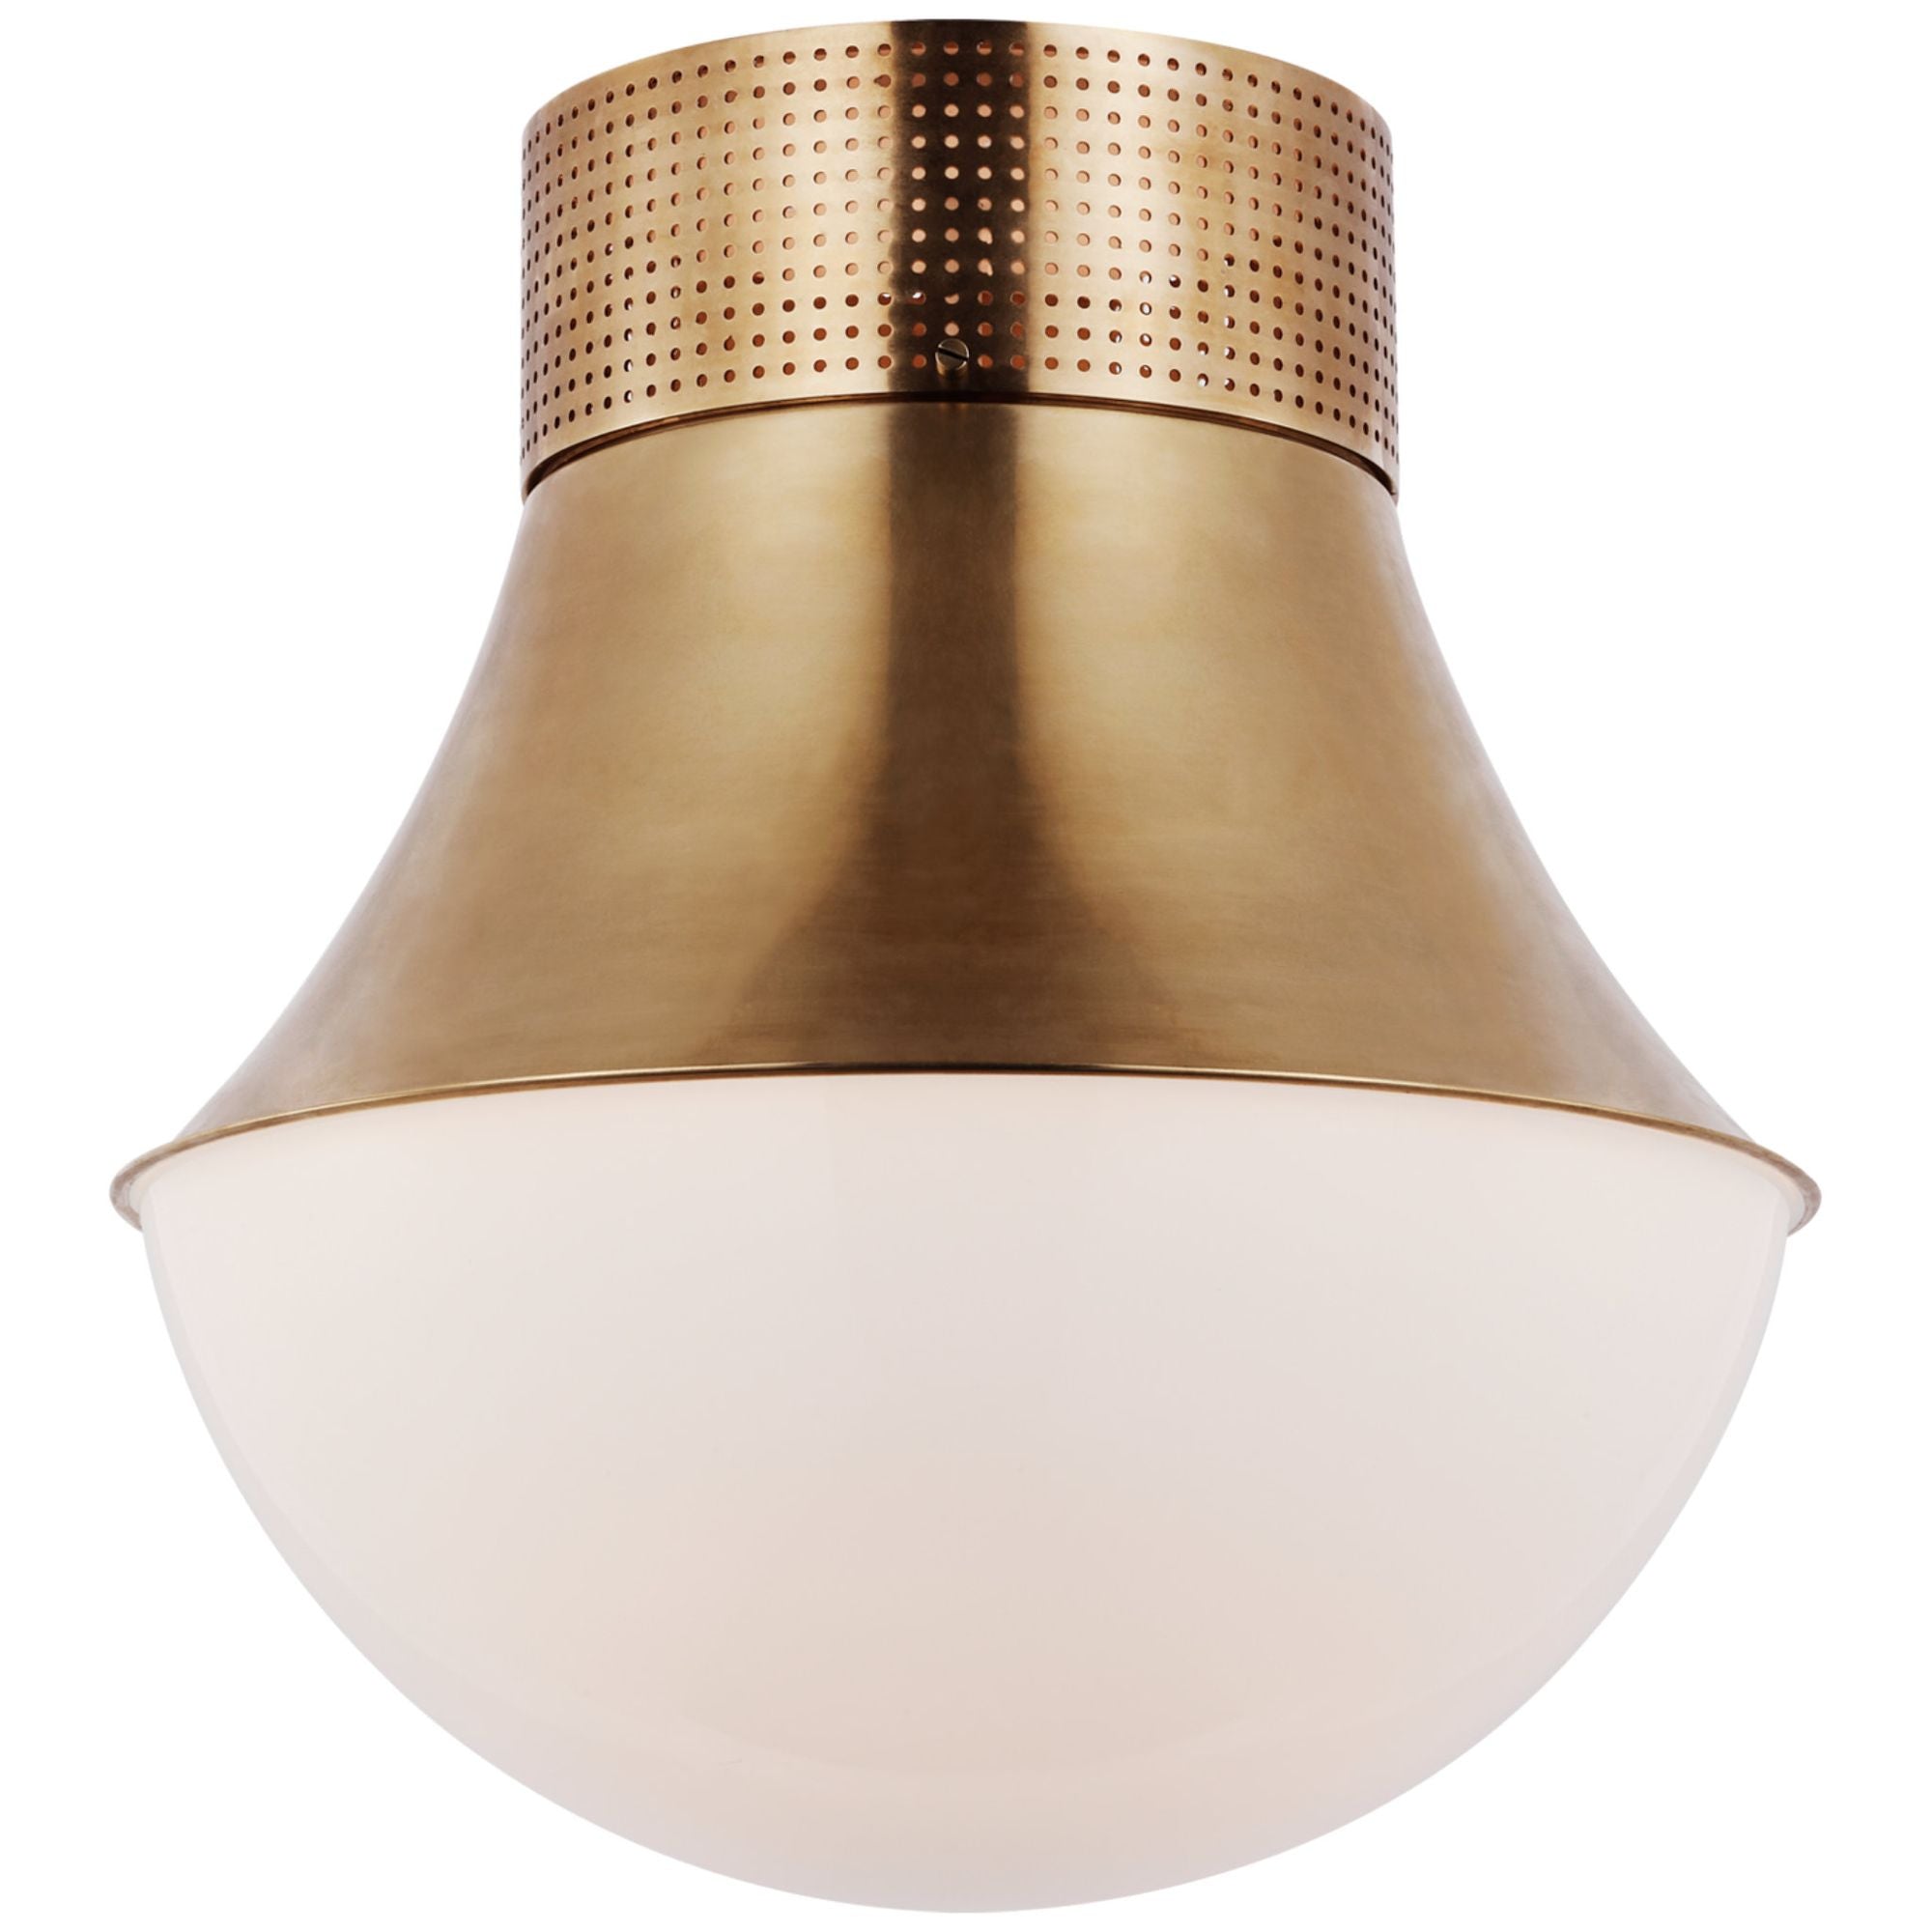 Kelly Wearstler Precision 17" Flush Mount in Antique-Burnished Brass with White Glass